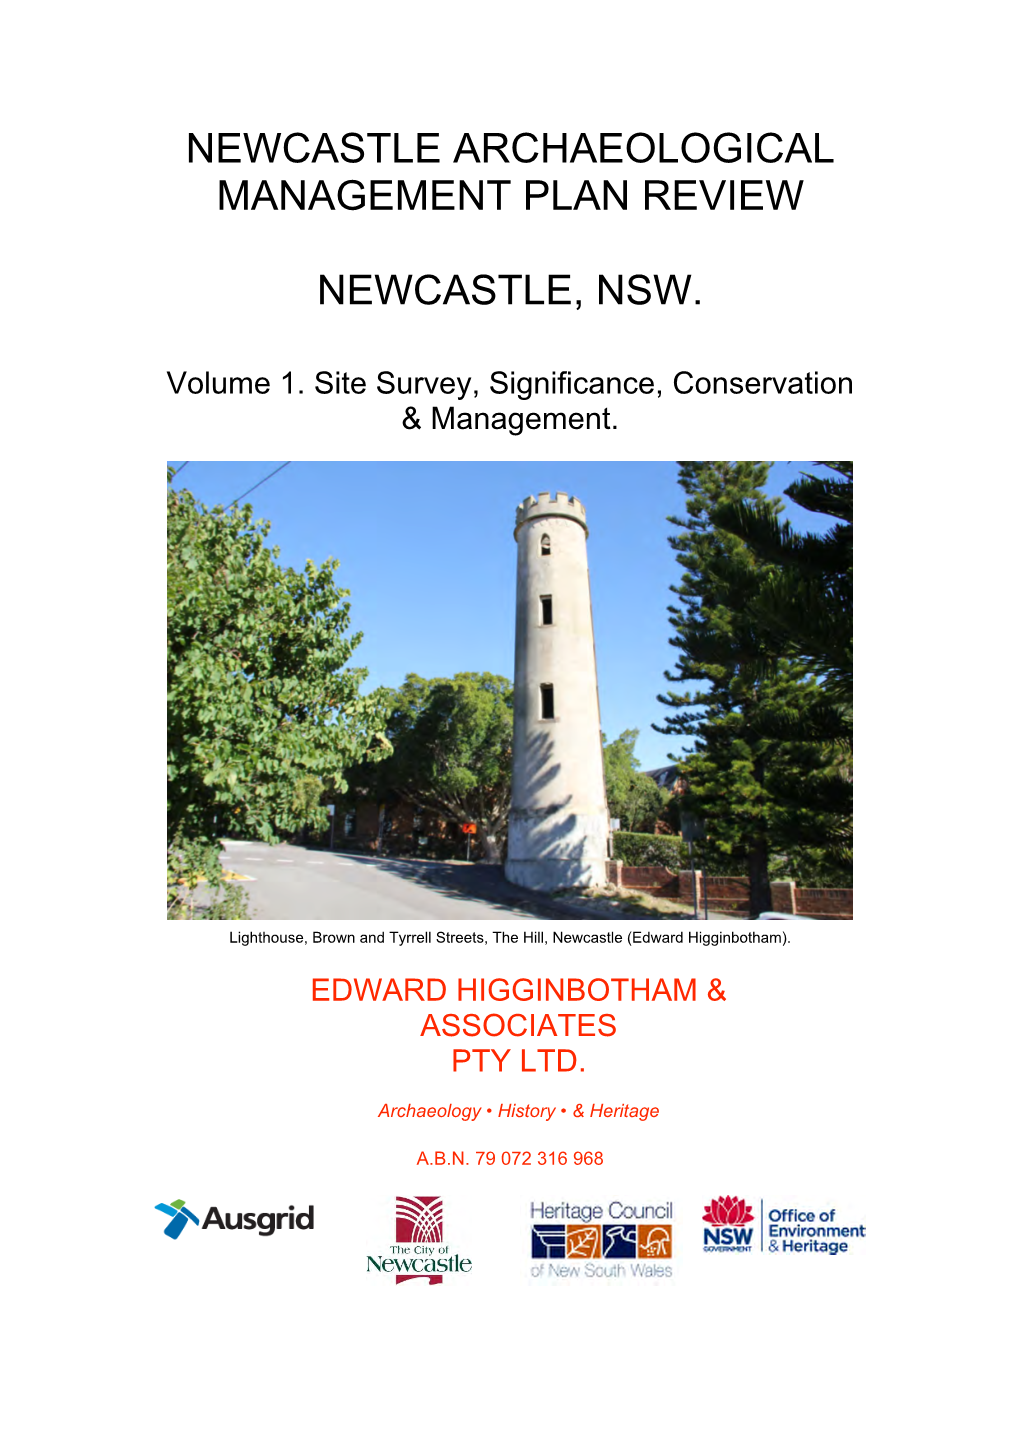 Newcastle Archaeological Management Plan Review 2013 Volume 1